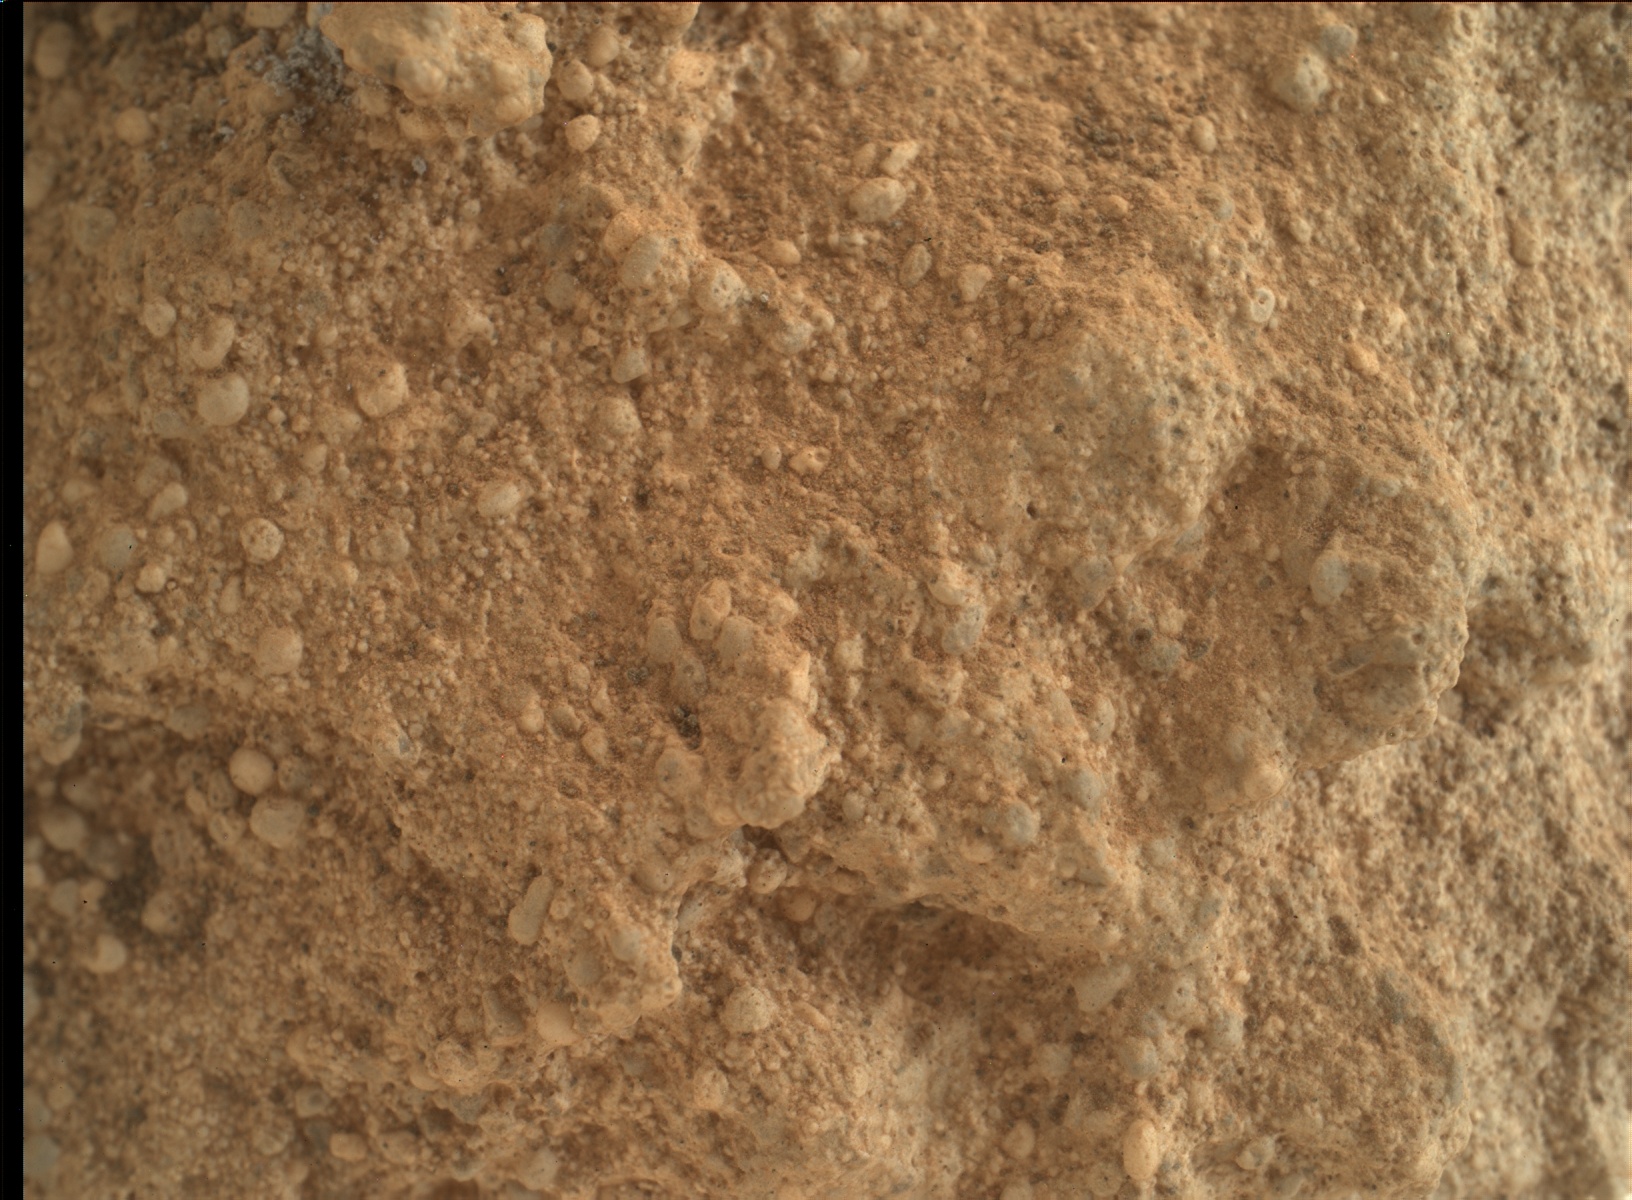 Nasa's Mars rover Curiosity acquired this image using its Mars Hand Lens Imager (MAHLI) on Sol 1092